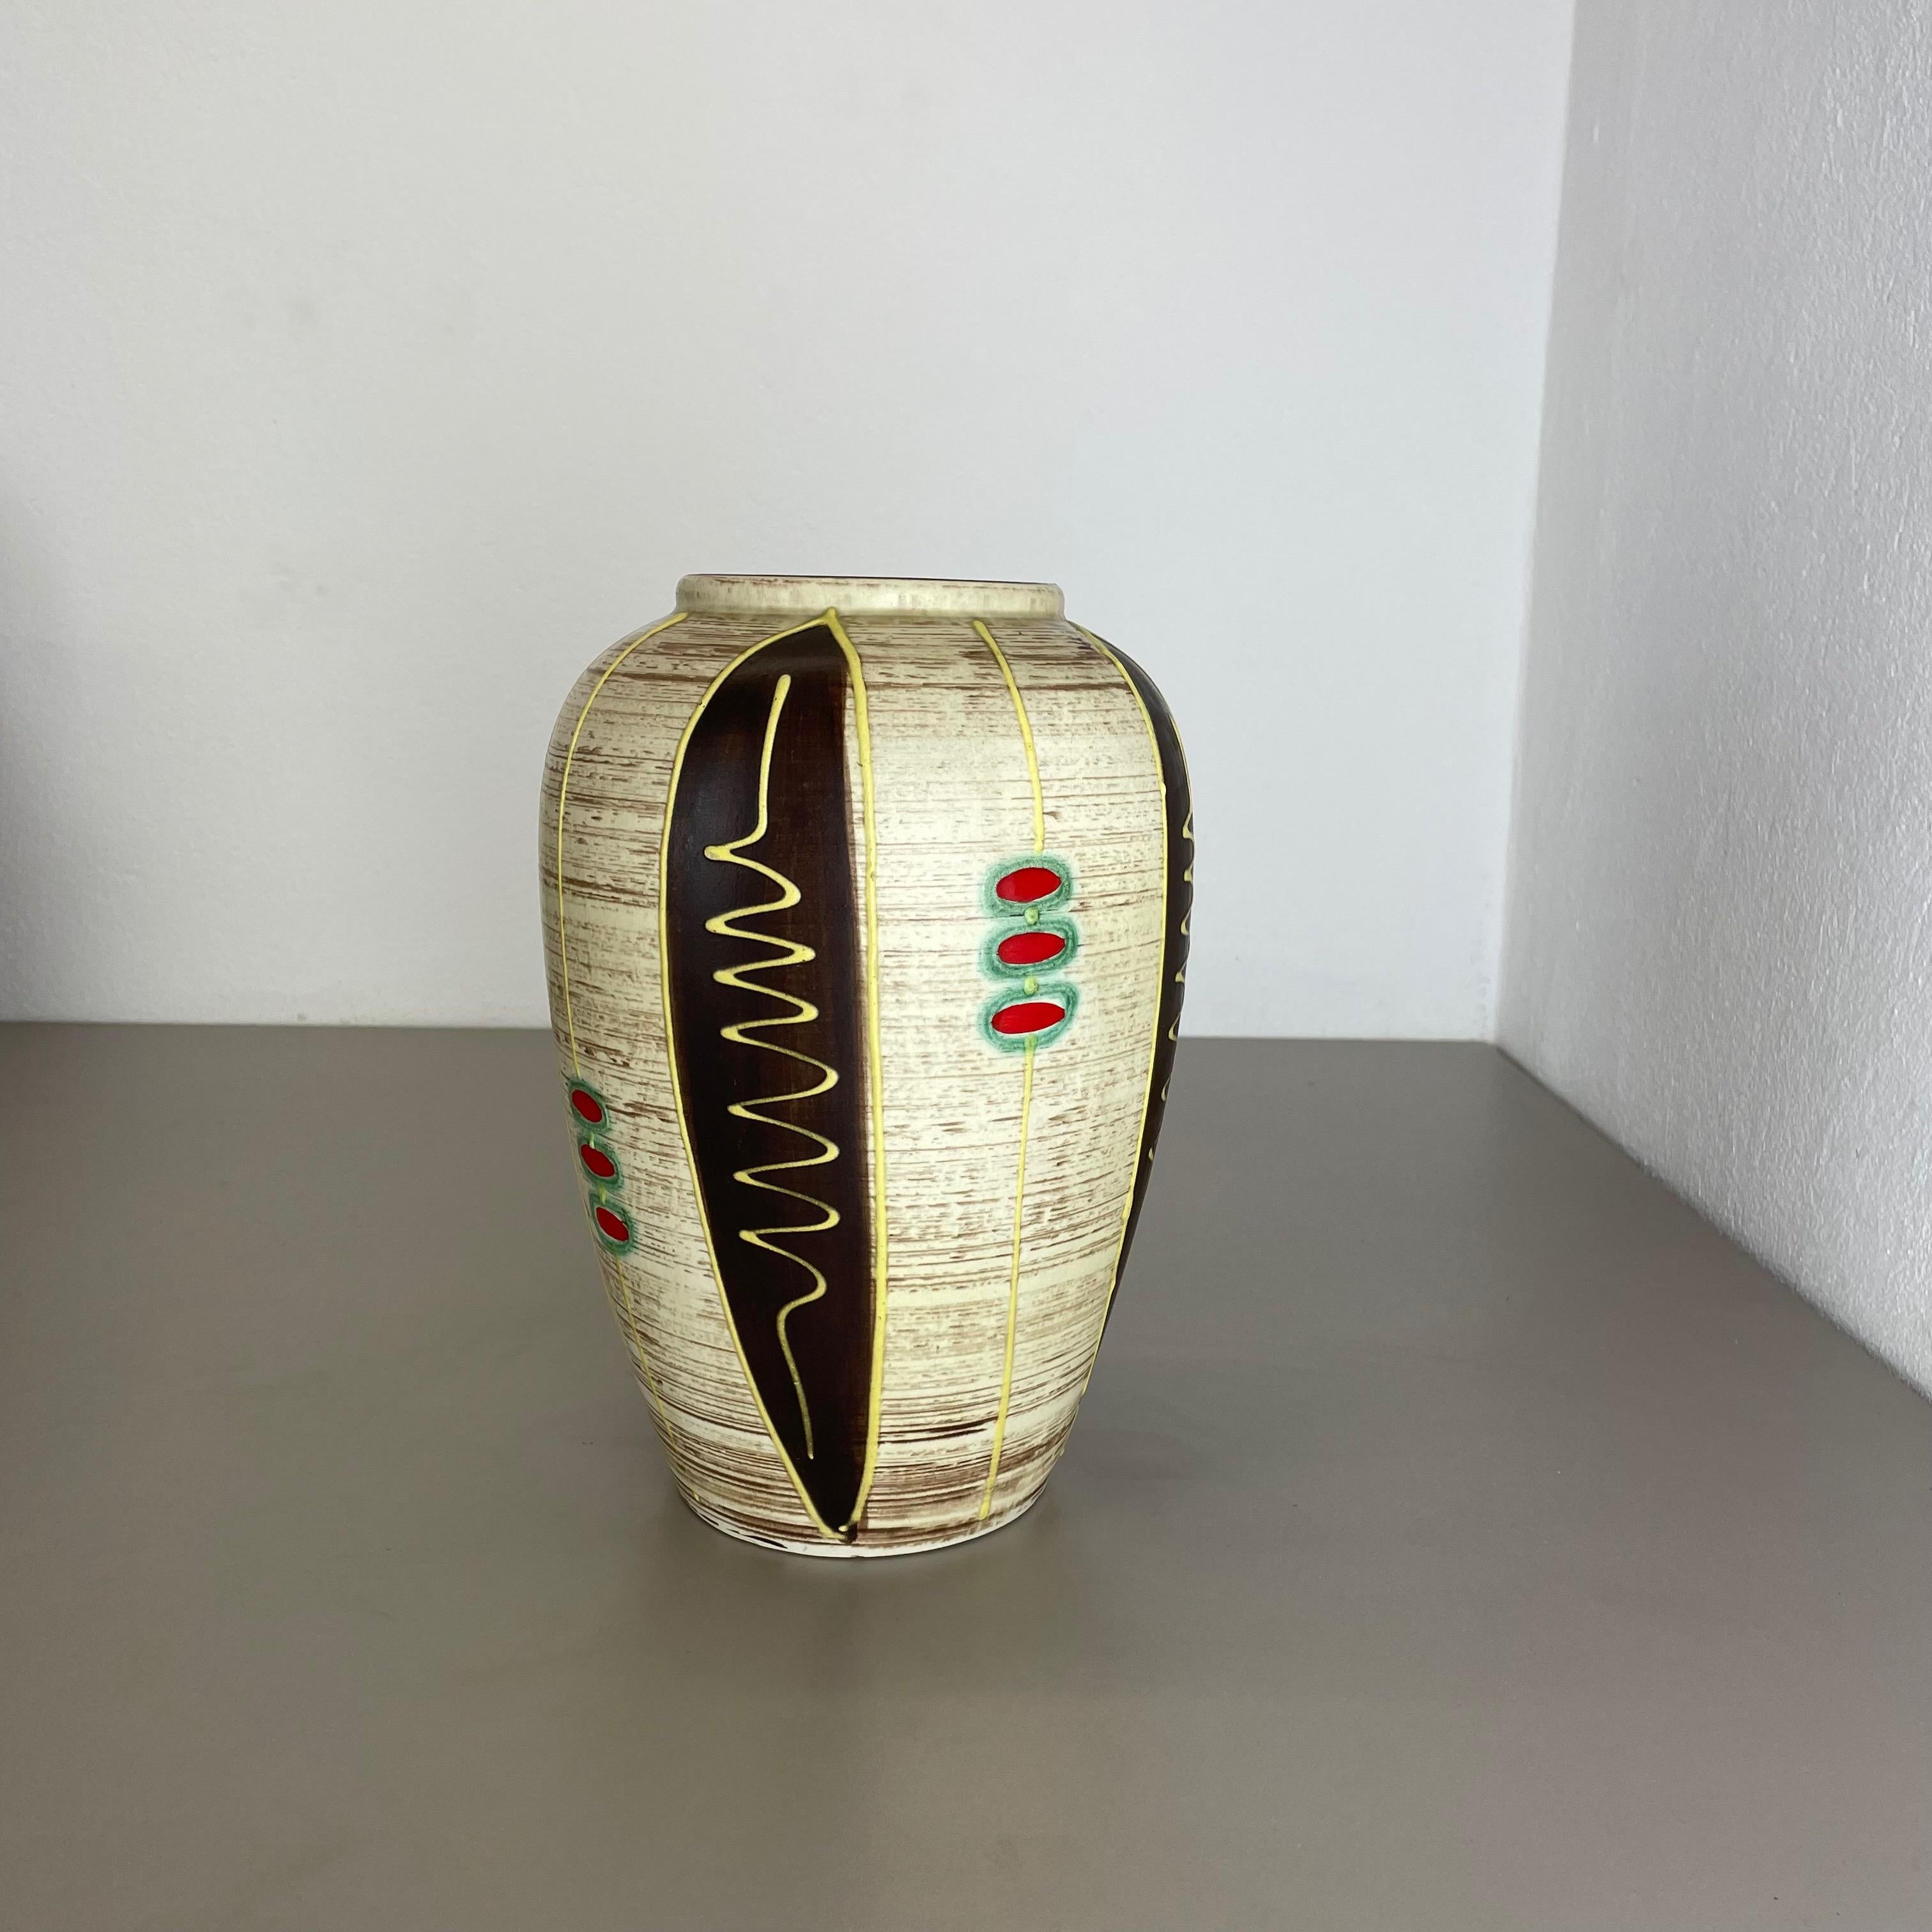 Article:

Pottery ceramic vase


Producer:

JASBA Ceramic, Germany



Decade:

1970s




Original vintage 1950s pottery ceramic vase made in Germany. High quality German production with a nice abstract illustration with stripes and